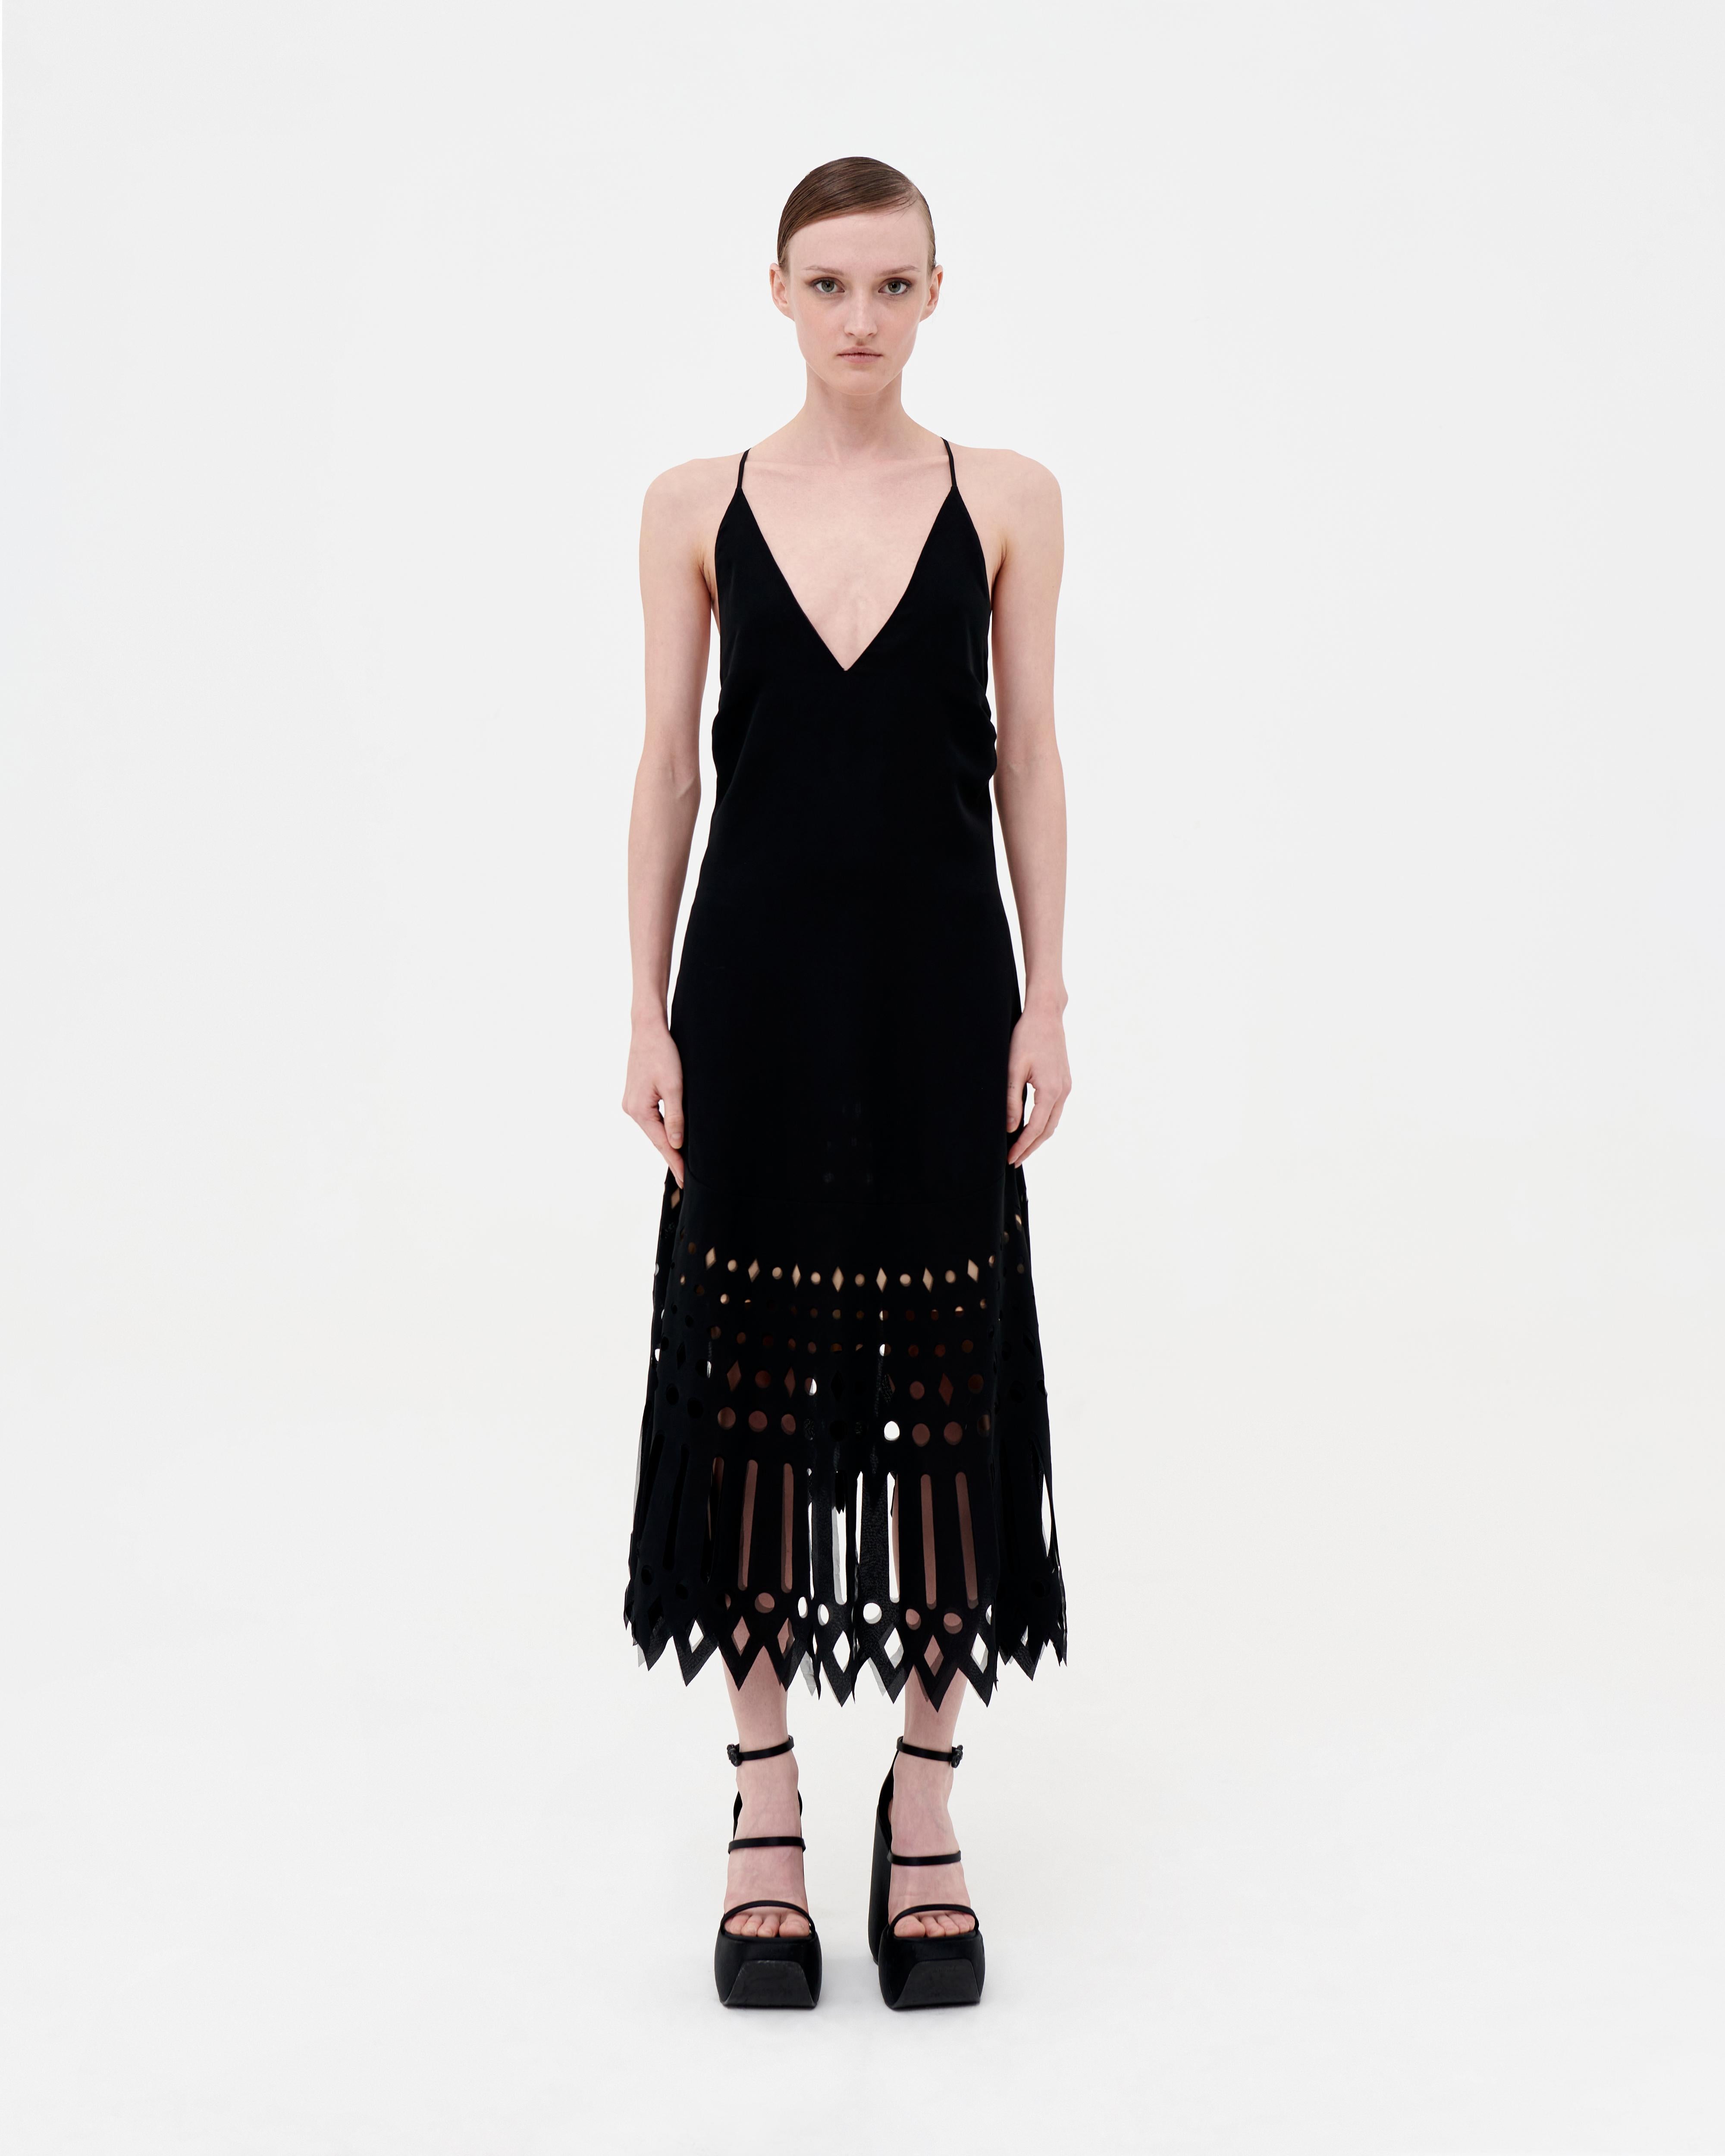 Gianfranco Ferré plunging black dress with laser cut geometrical motif. Nude petticoat from the waist on, backless with skinny shoulder straps and asymmetric flare. Minor faults on the detailing on the back, reflected on price

Size Italian